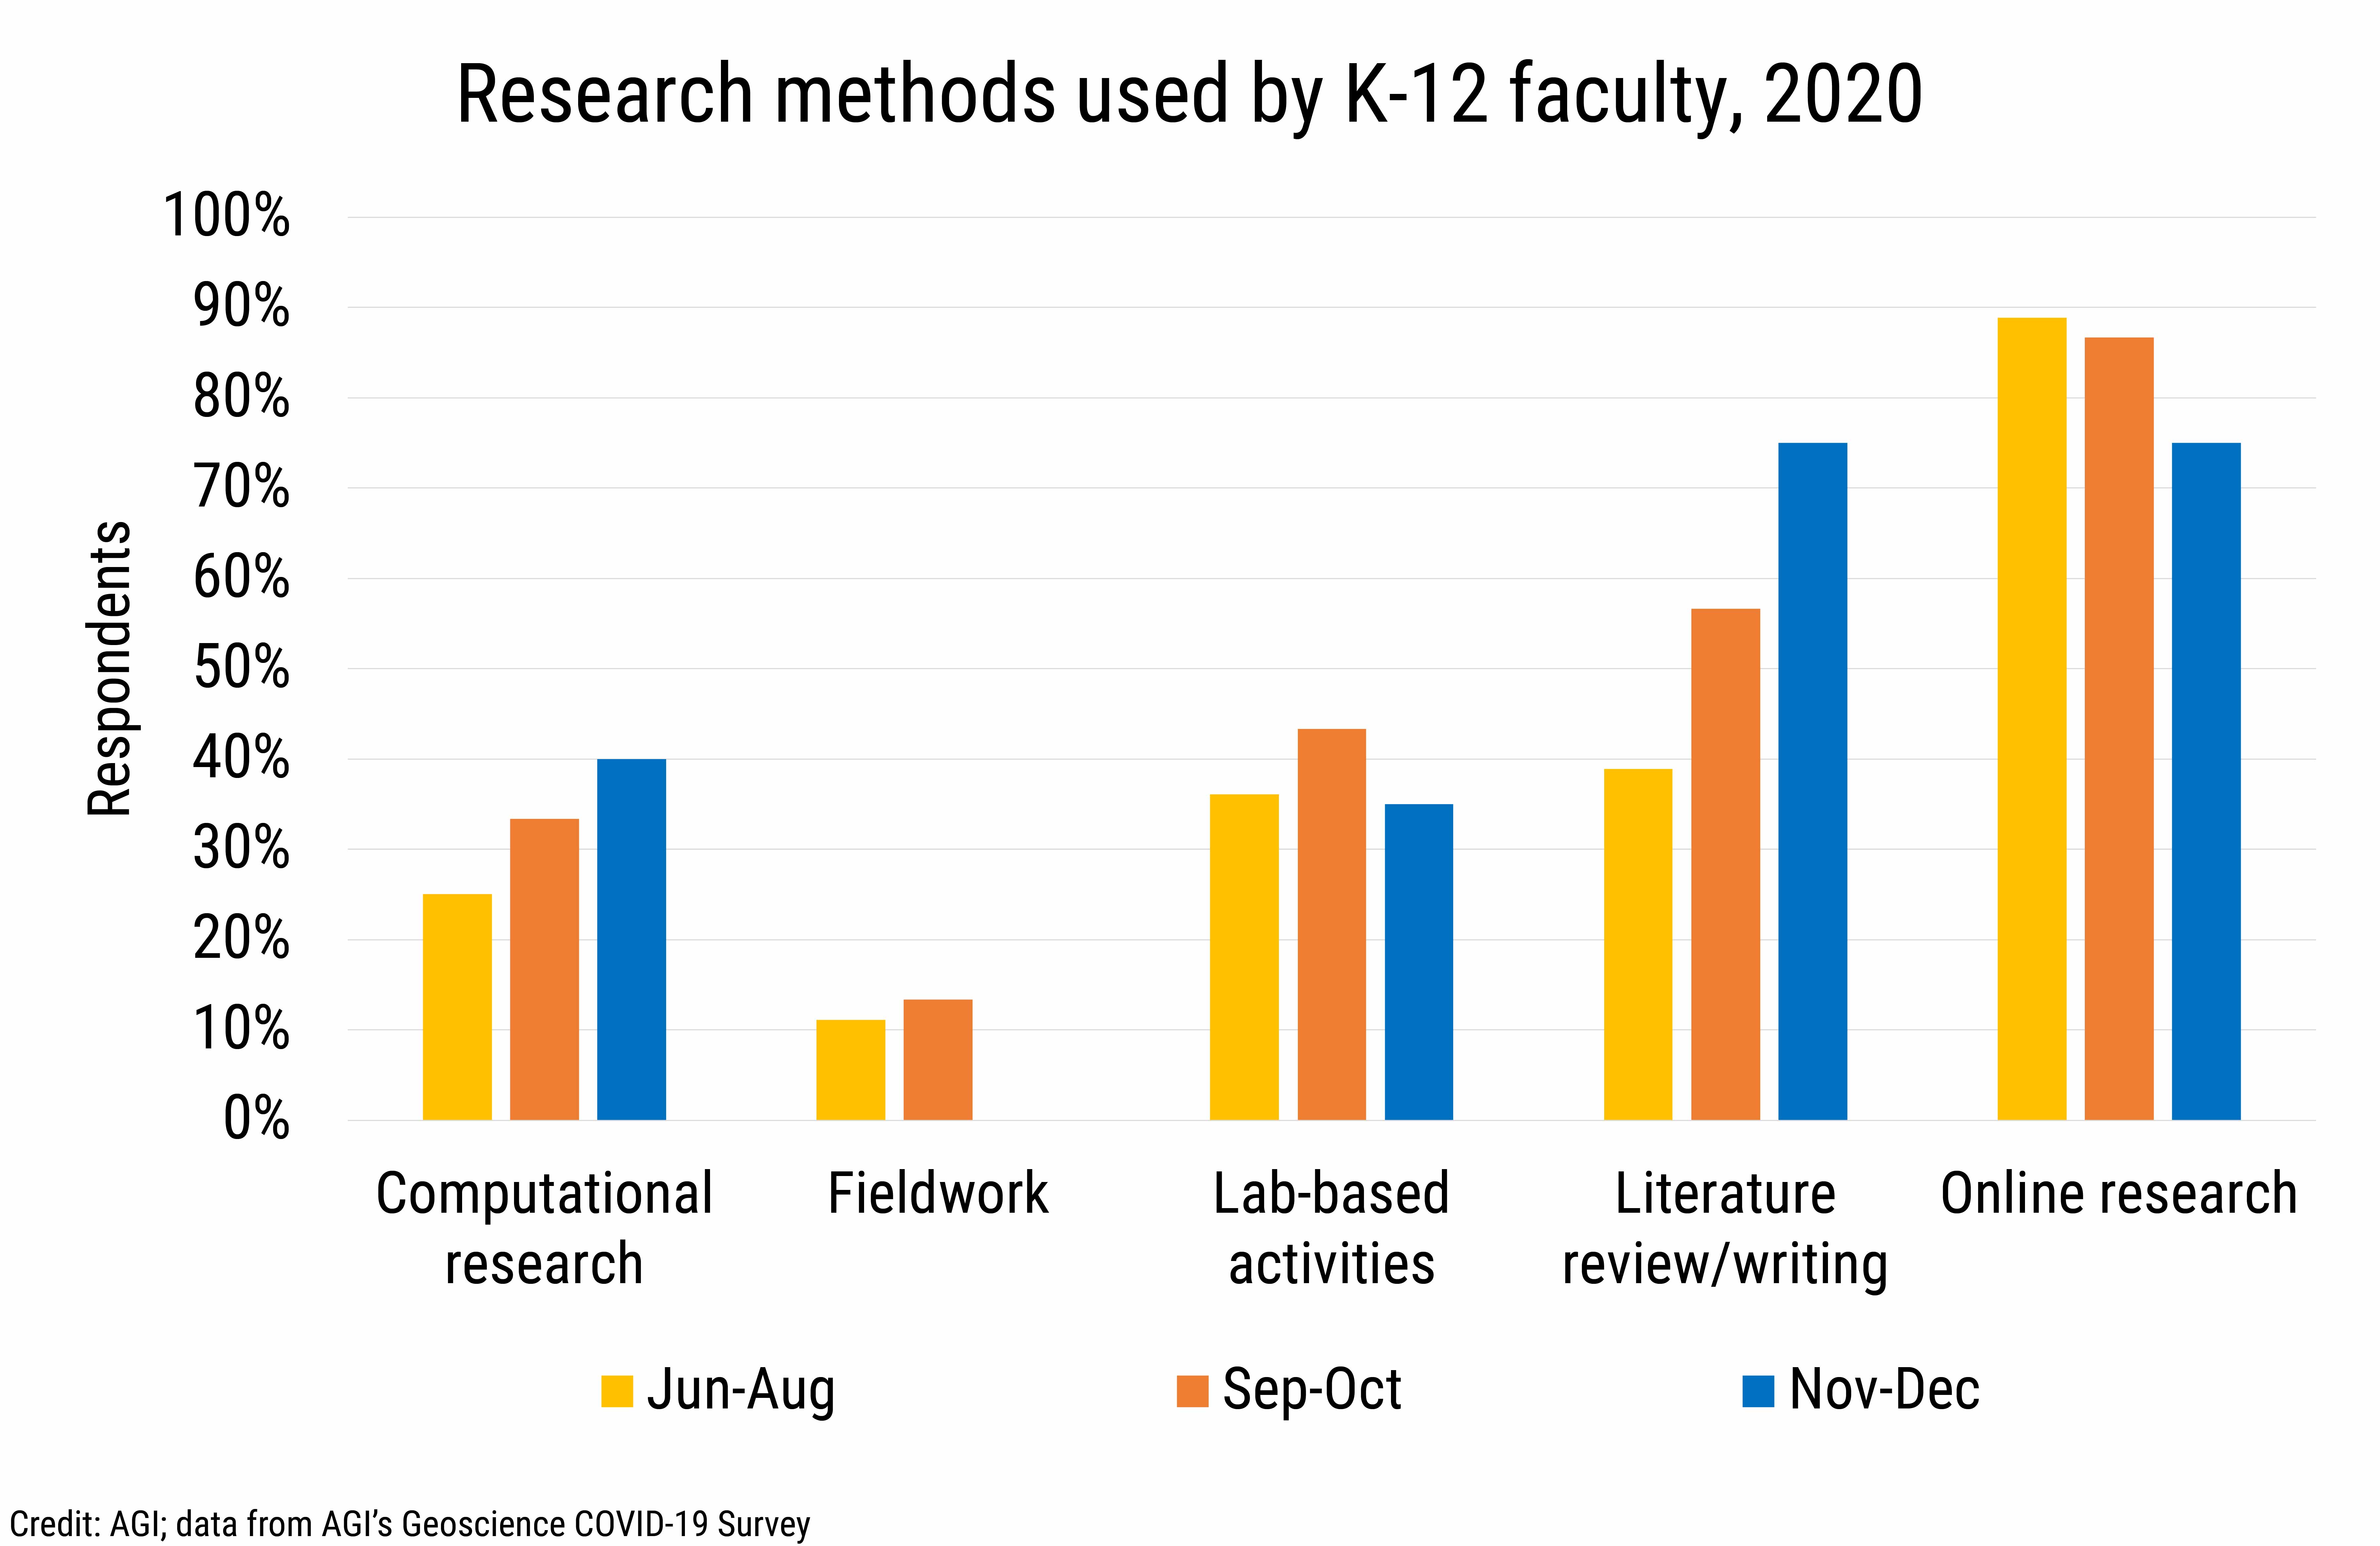 DB_2021-002 chart 04: Research methods used by non-academic geoscientistse, 2020 (Credit: AGI; data from AGI's Geoscience COVID-19 Survey)